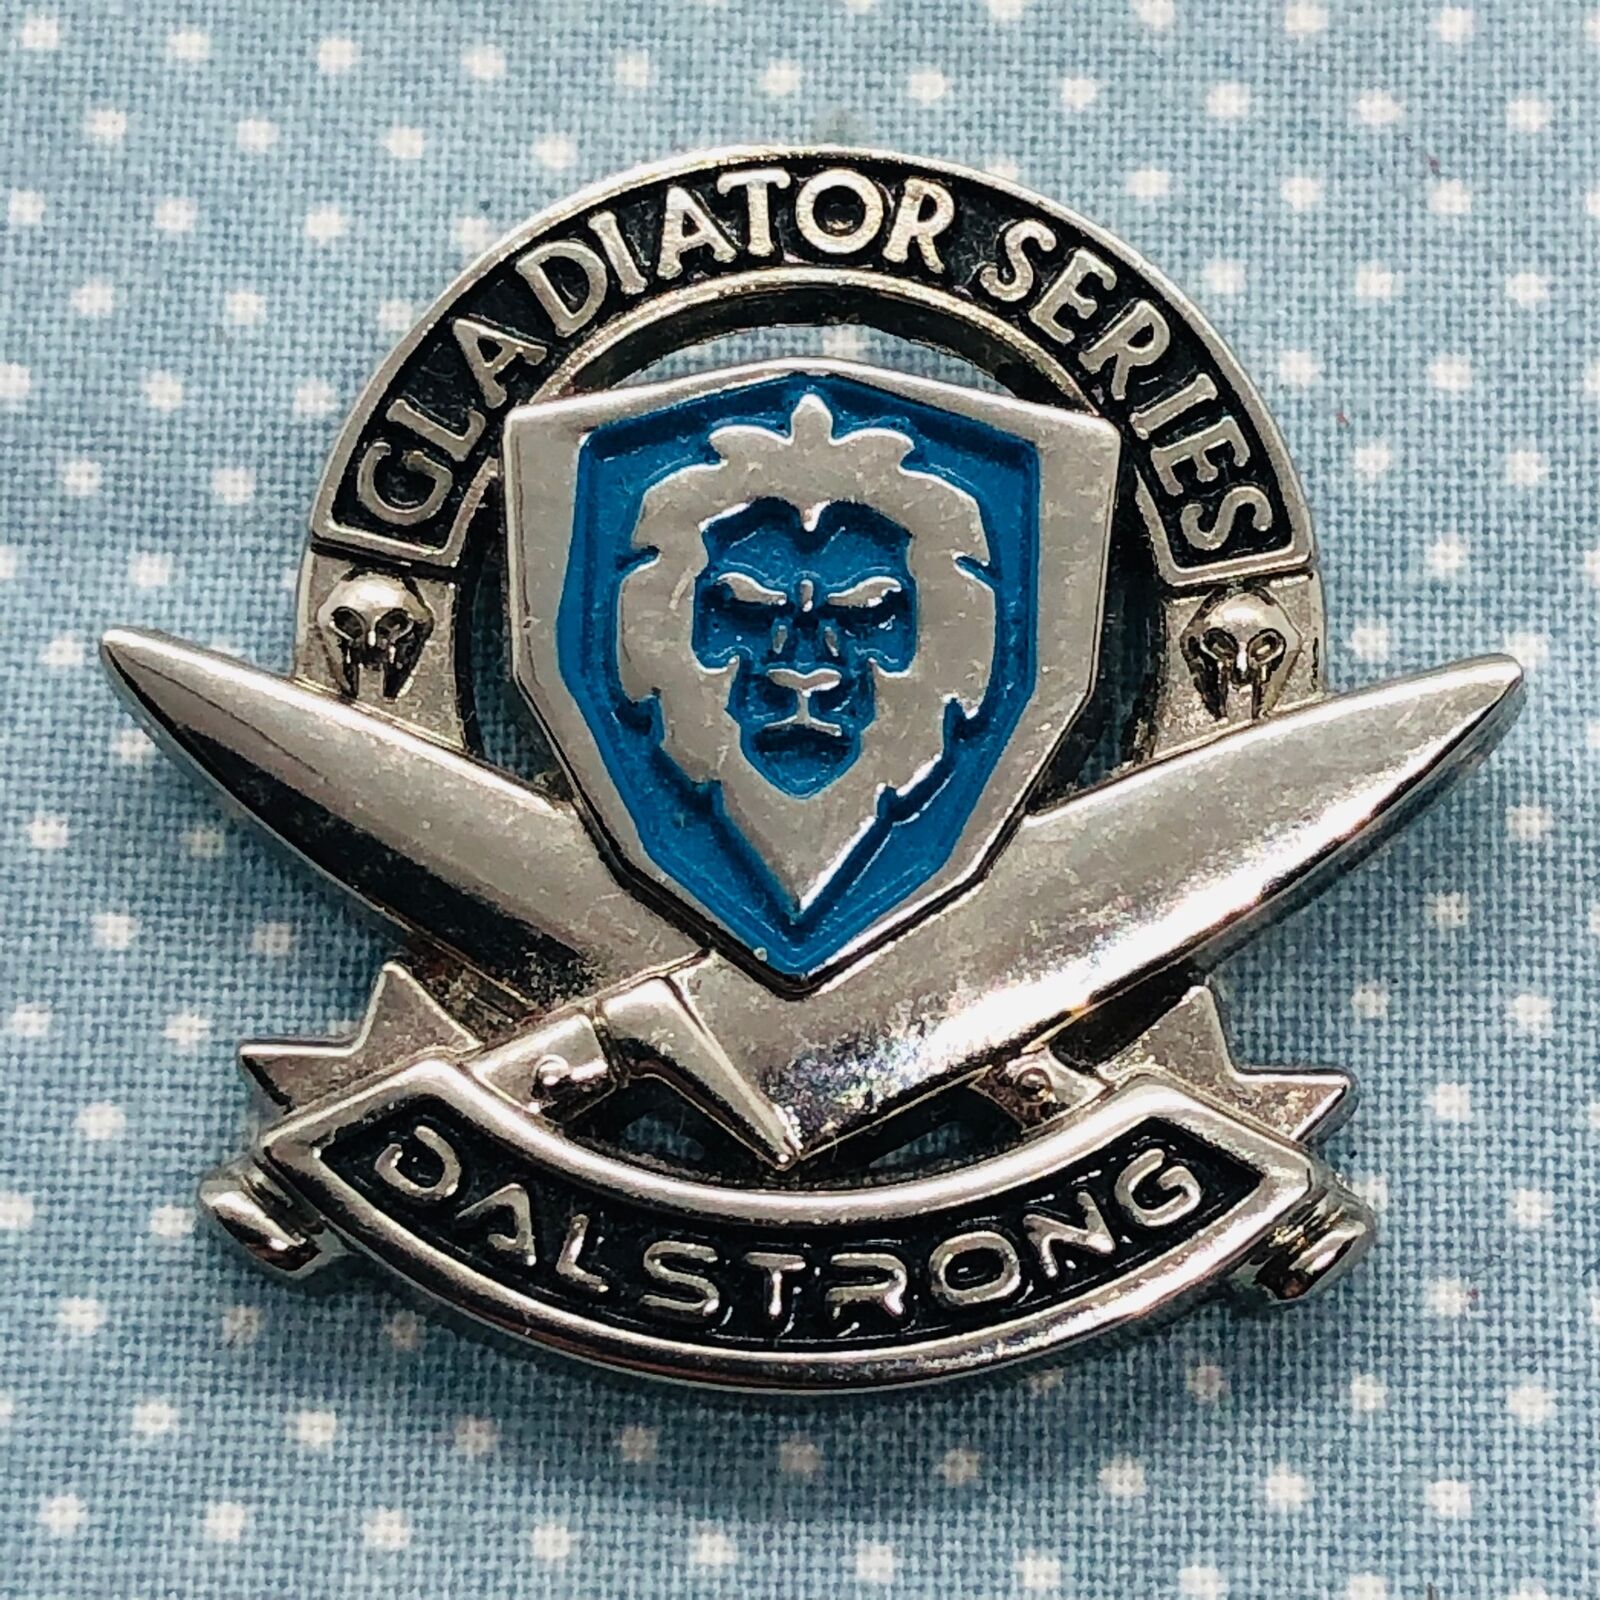 Dalstrong Gladiator Series Professional Knife Advertising Lapel Pin